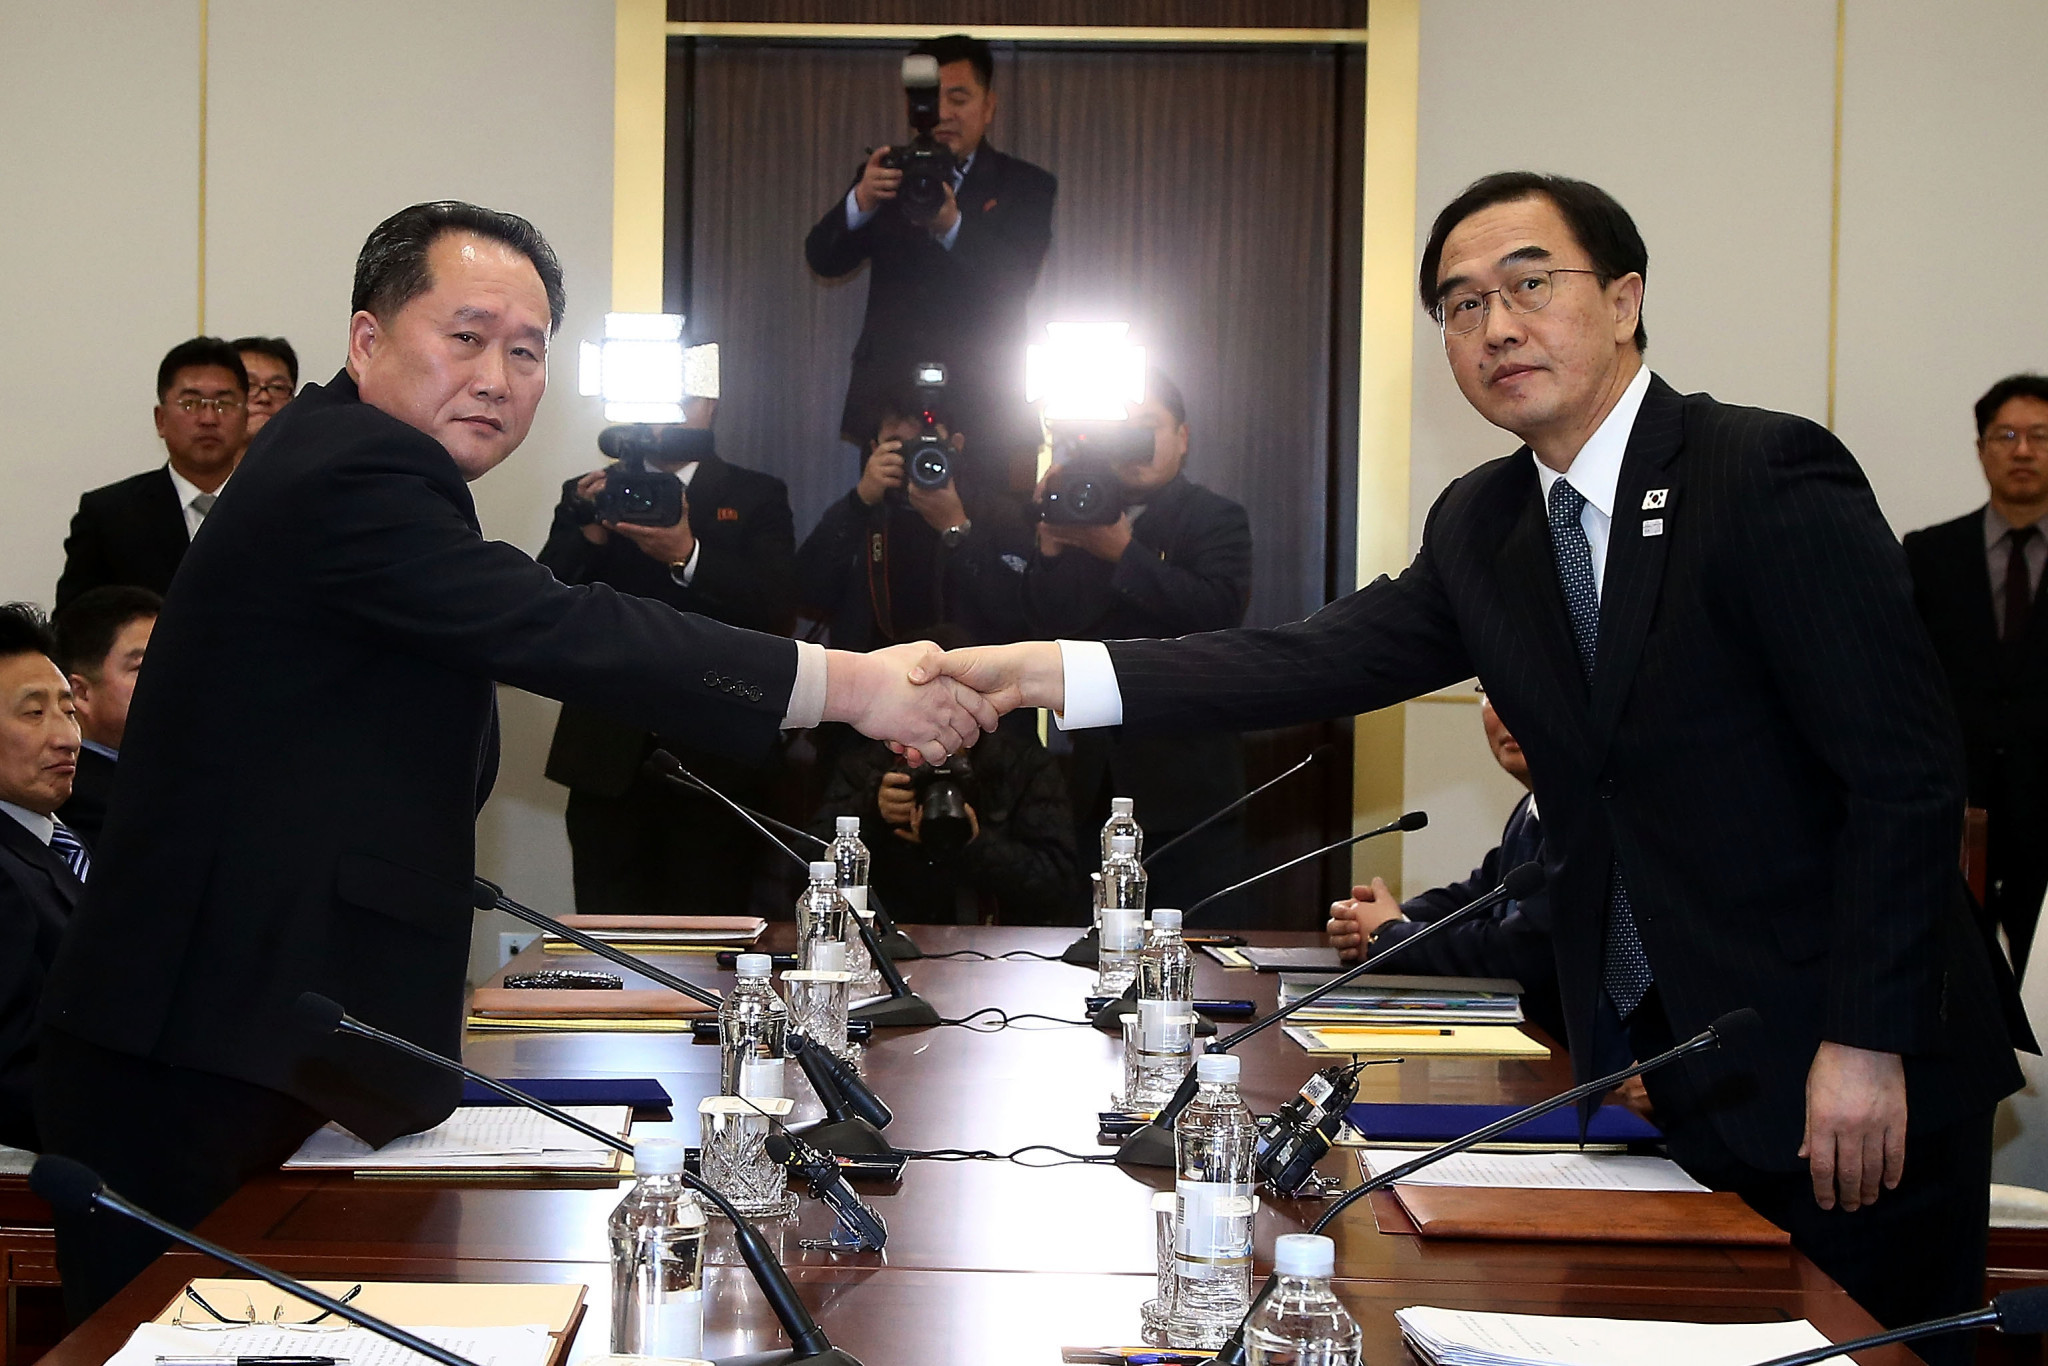 Talks have been taking place between North and South Korea regarding participation at the upcoming Winter Olympics ©Getty Images